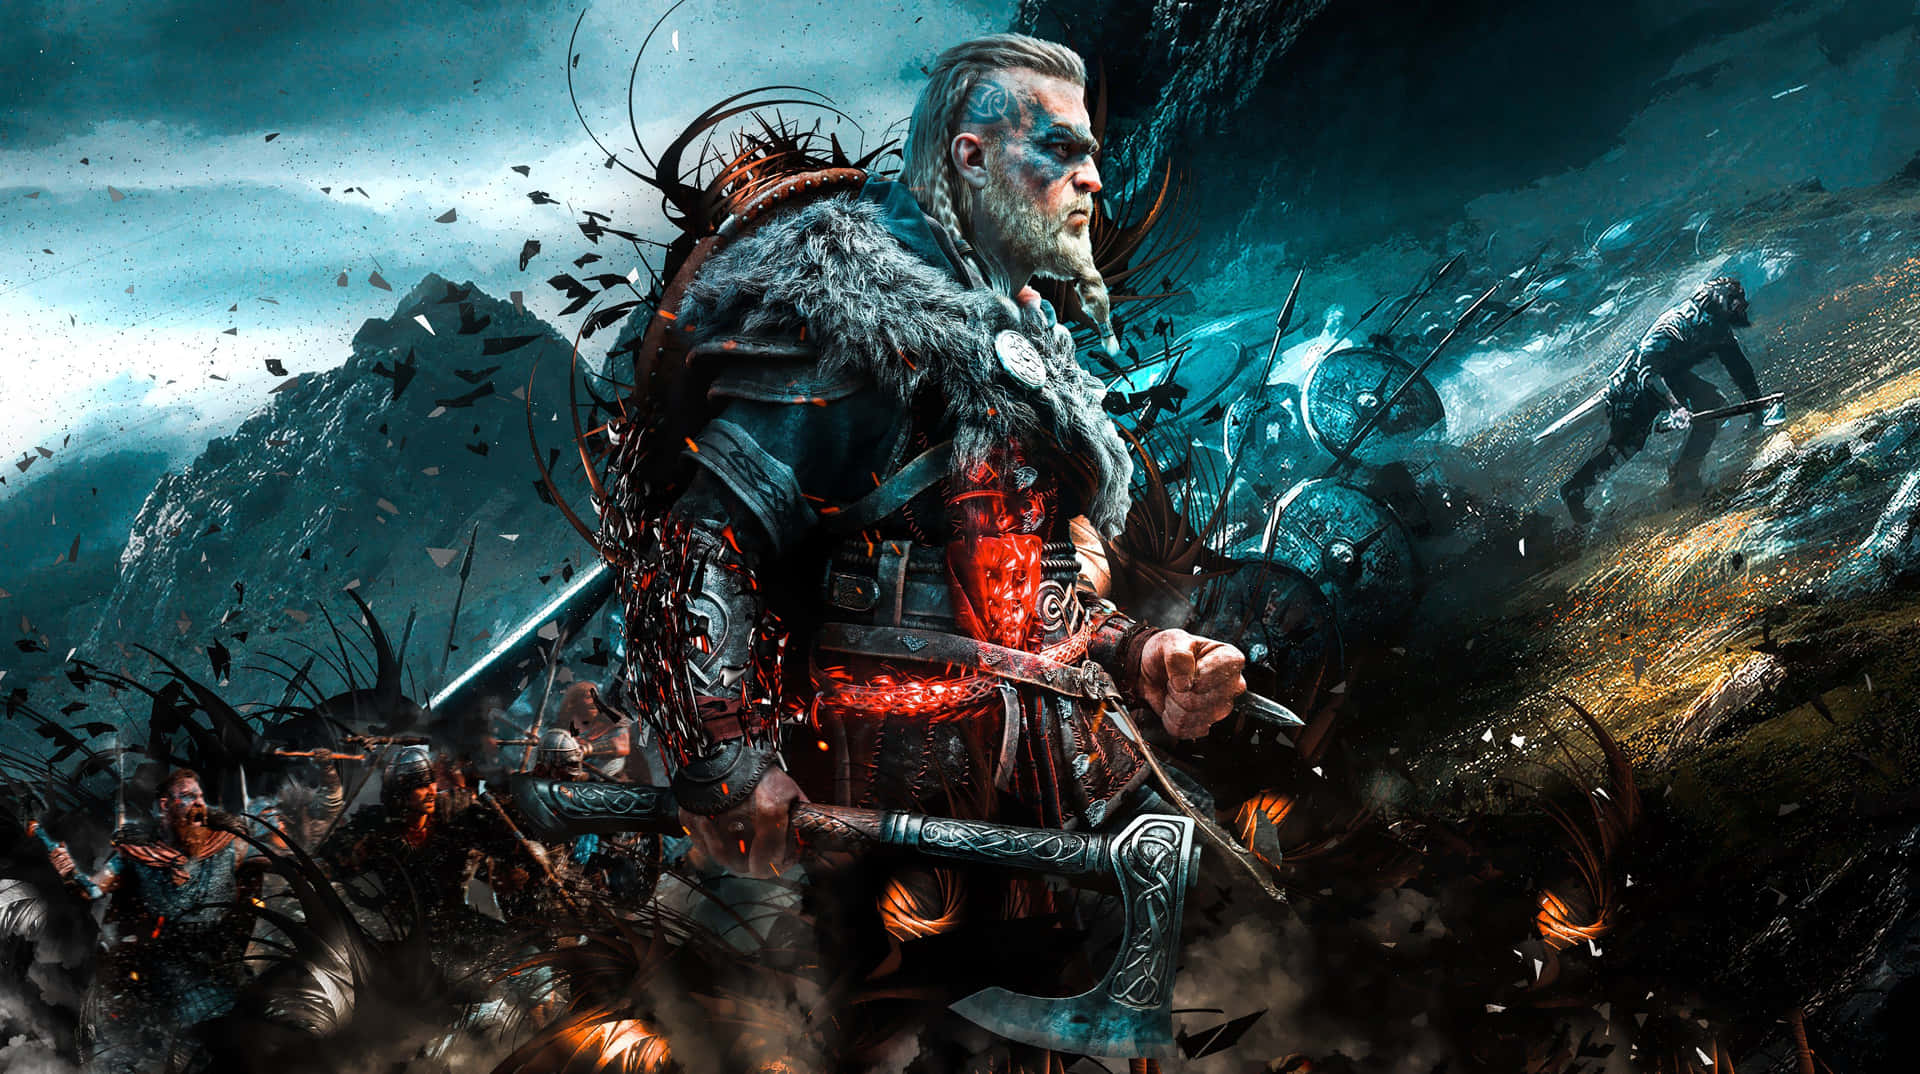 The Witcher 3 - The Witcher 3 Hd Wallpaper